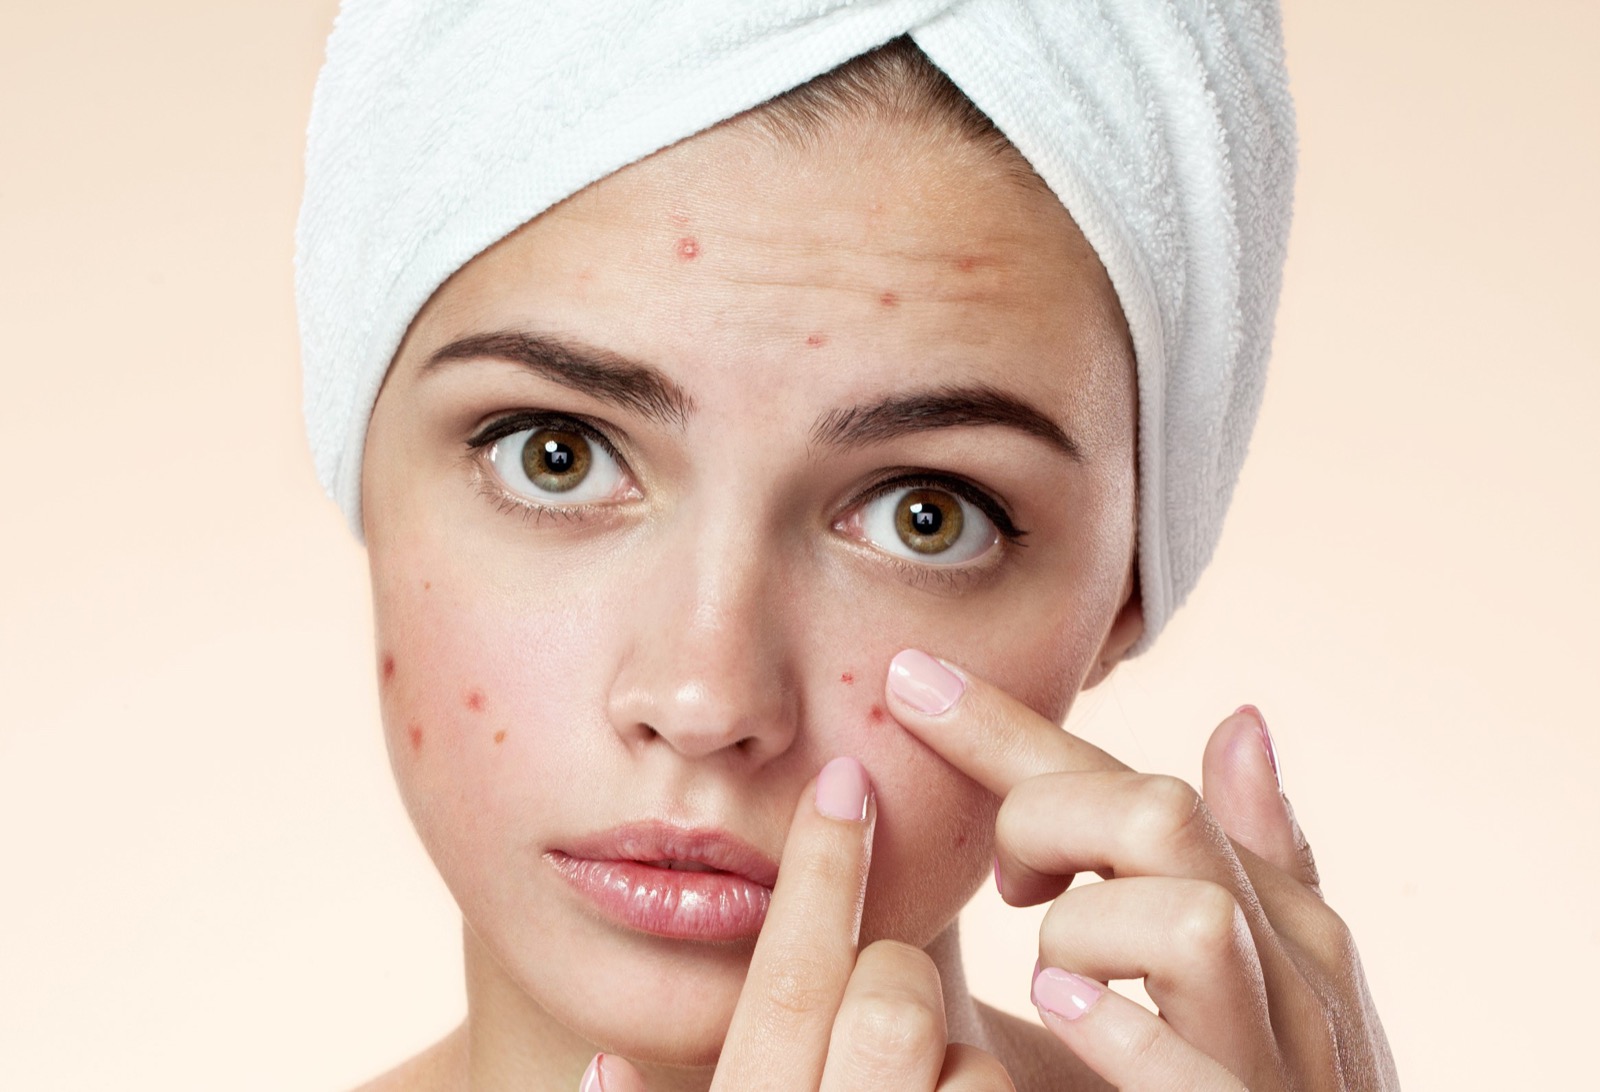 If You Have Done 50% Or More of These Things, I Regret to Inform You That You Are Gross 🤮 Acne pimple skincare beauty